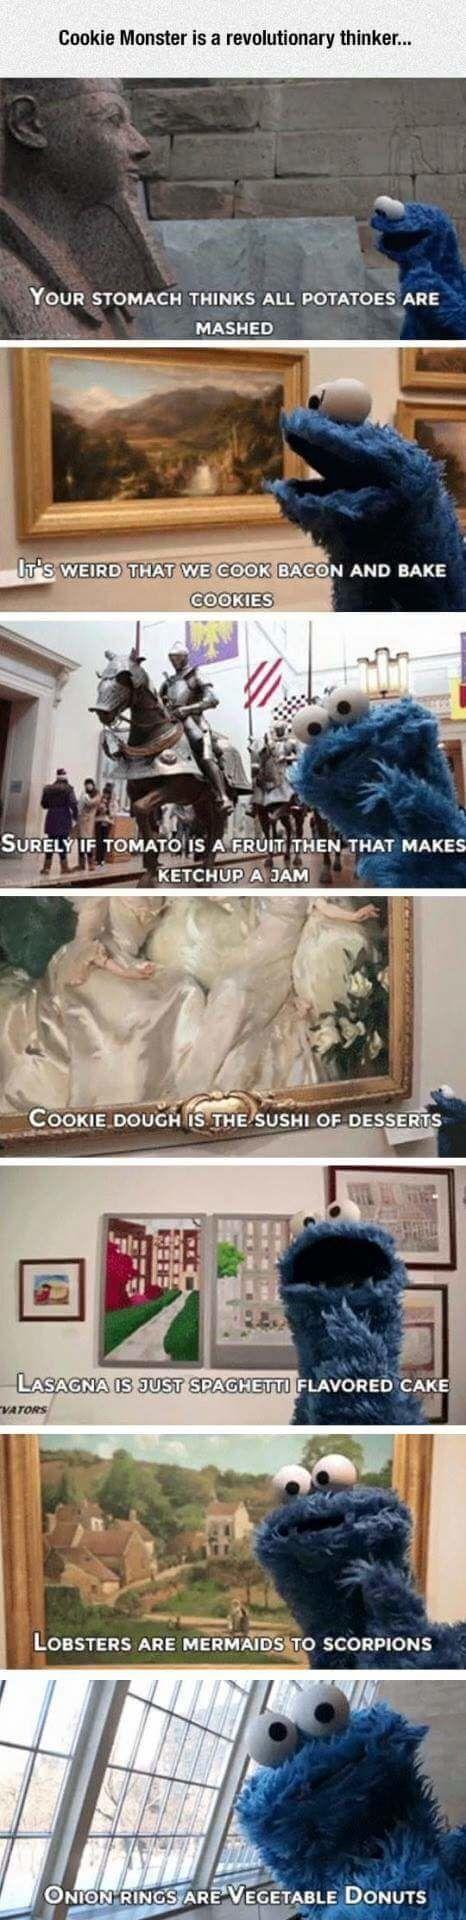 Cookie+Monster+is+bringing+culture+and+philosophy+into+your+house